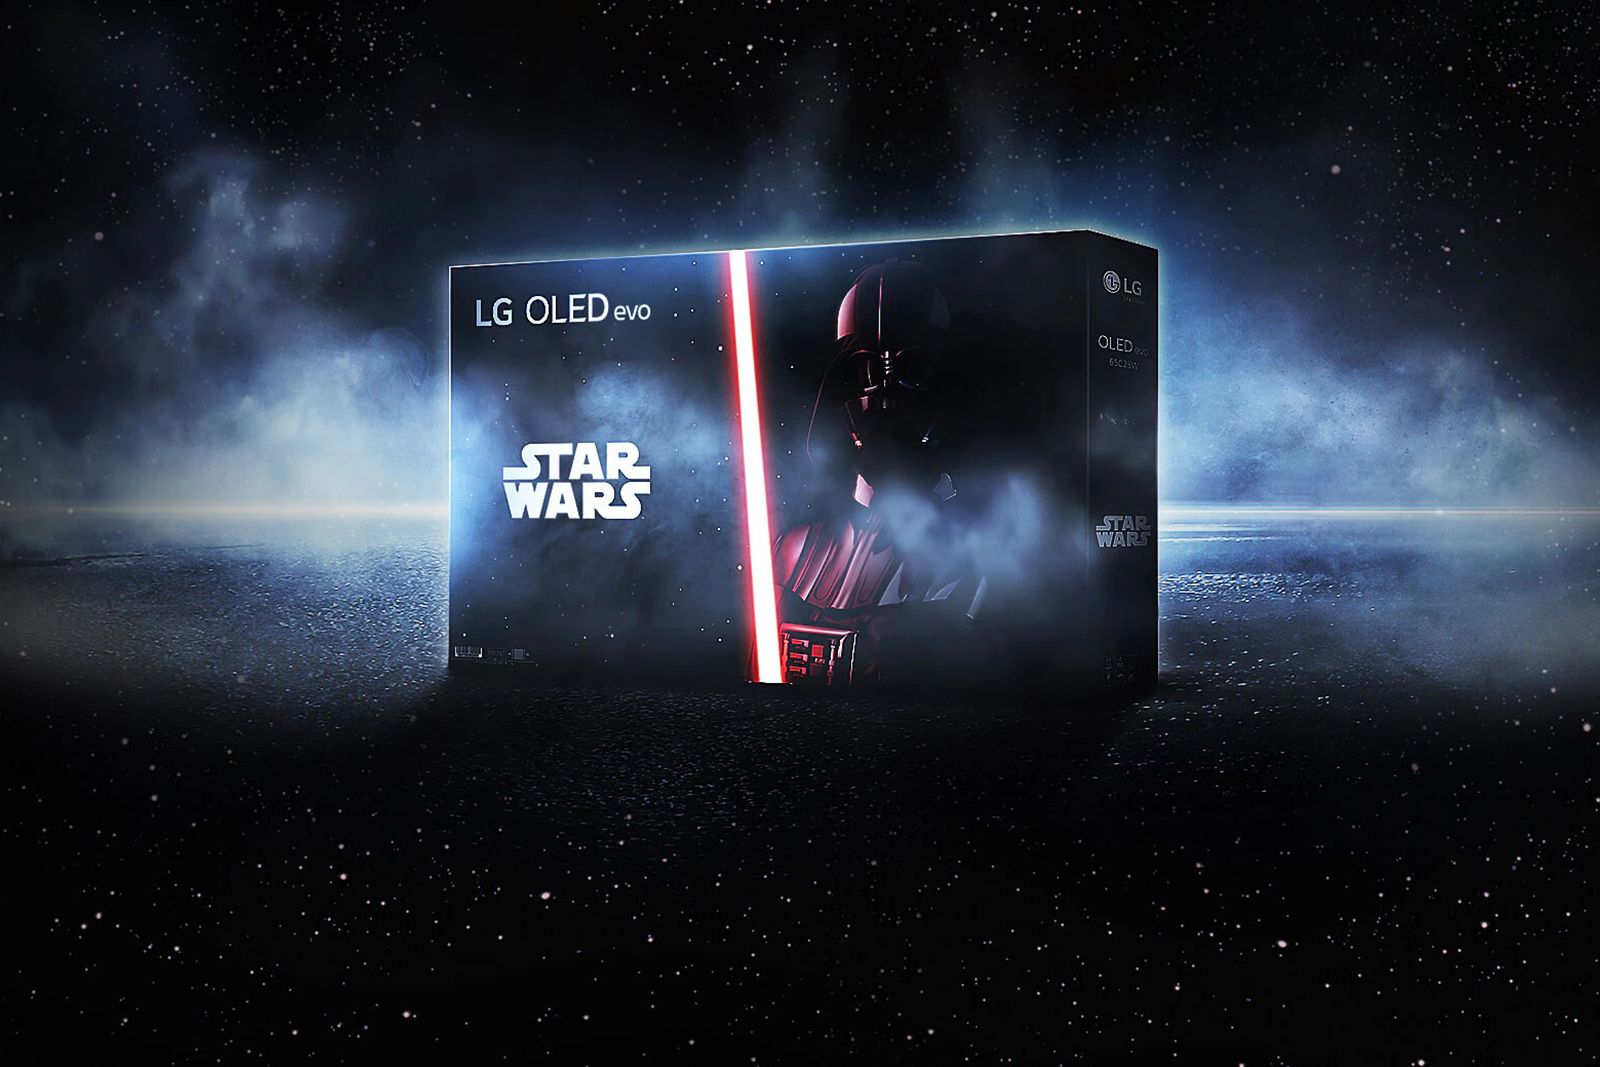 LG is releasing a Star Wars themed OLED TV photo 2